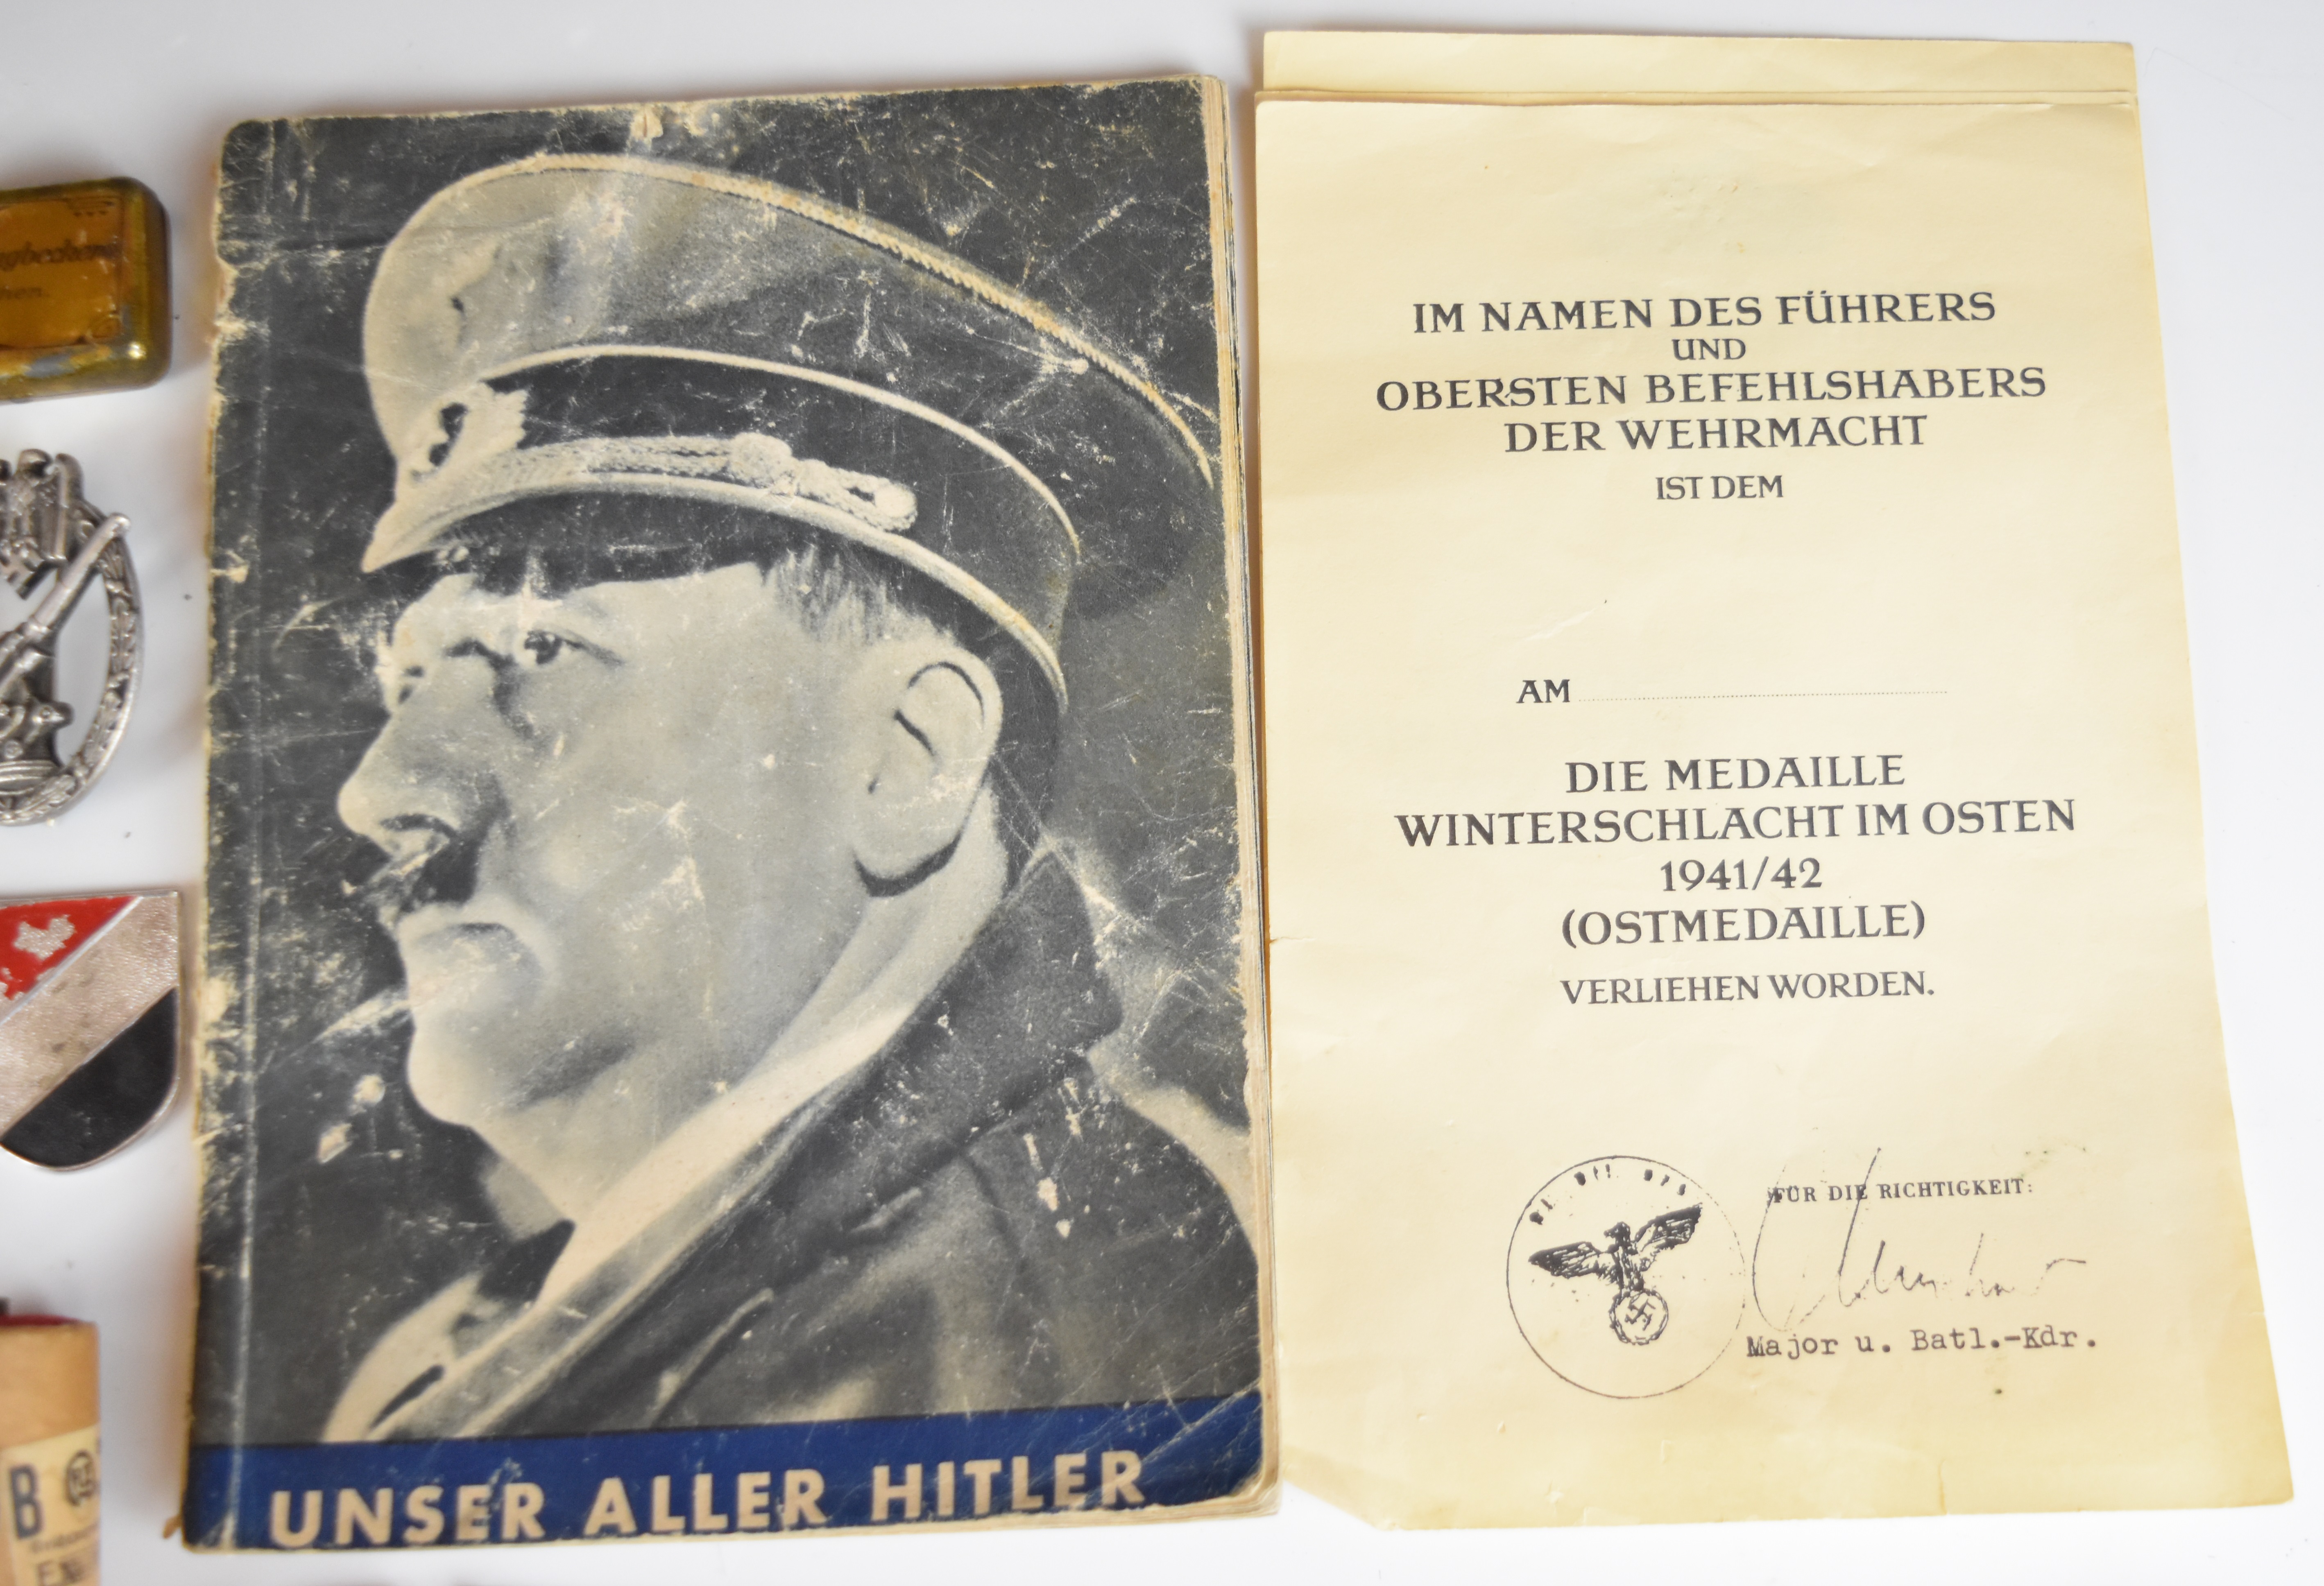 Mainly reproduction German WW2 Nazi insignia, booklets etc - Image 16 of 16